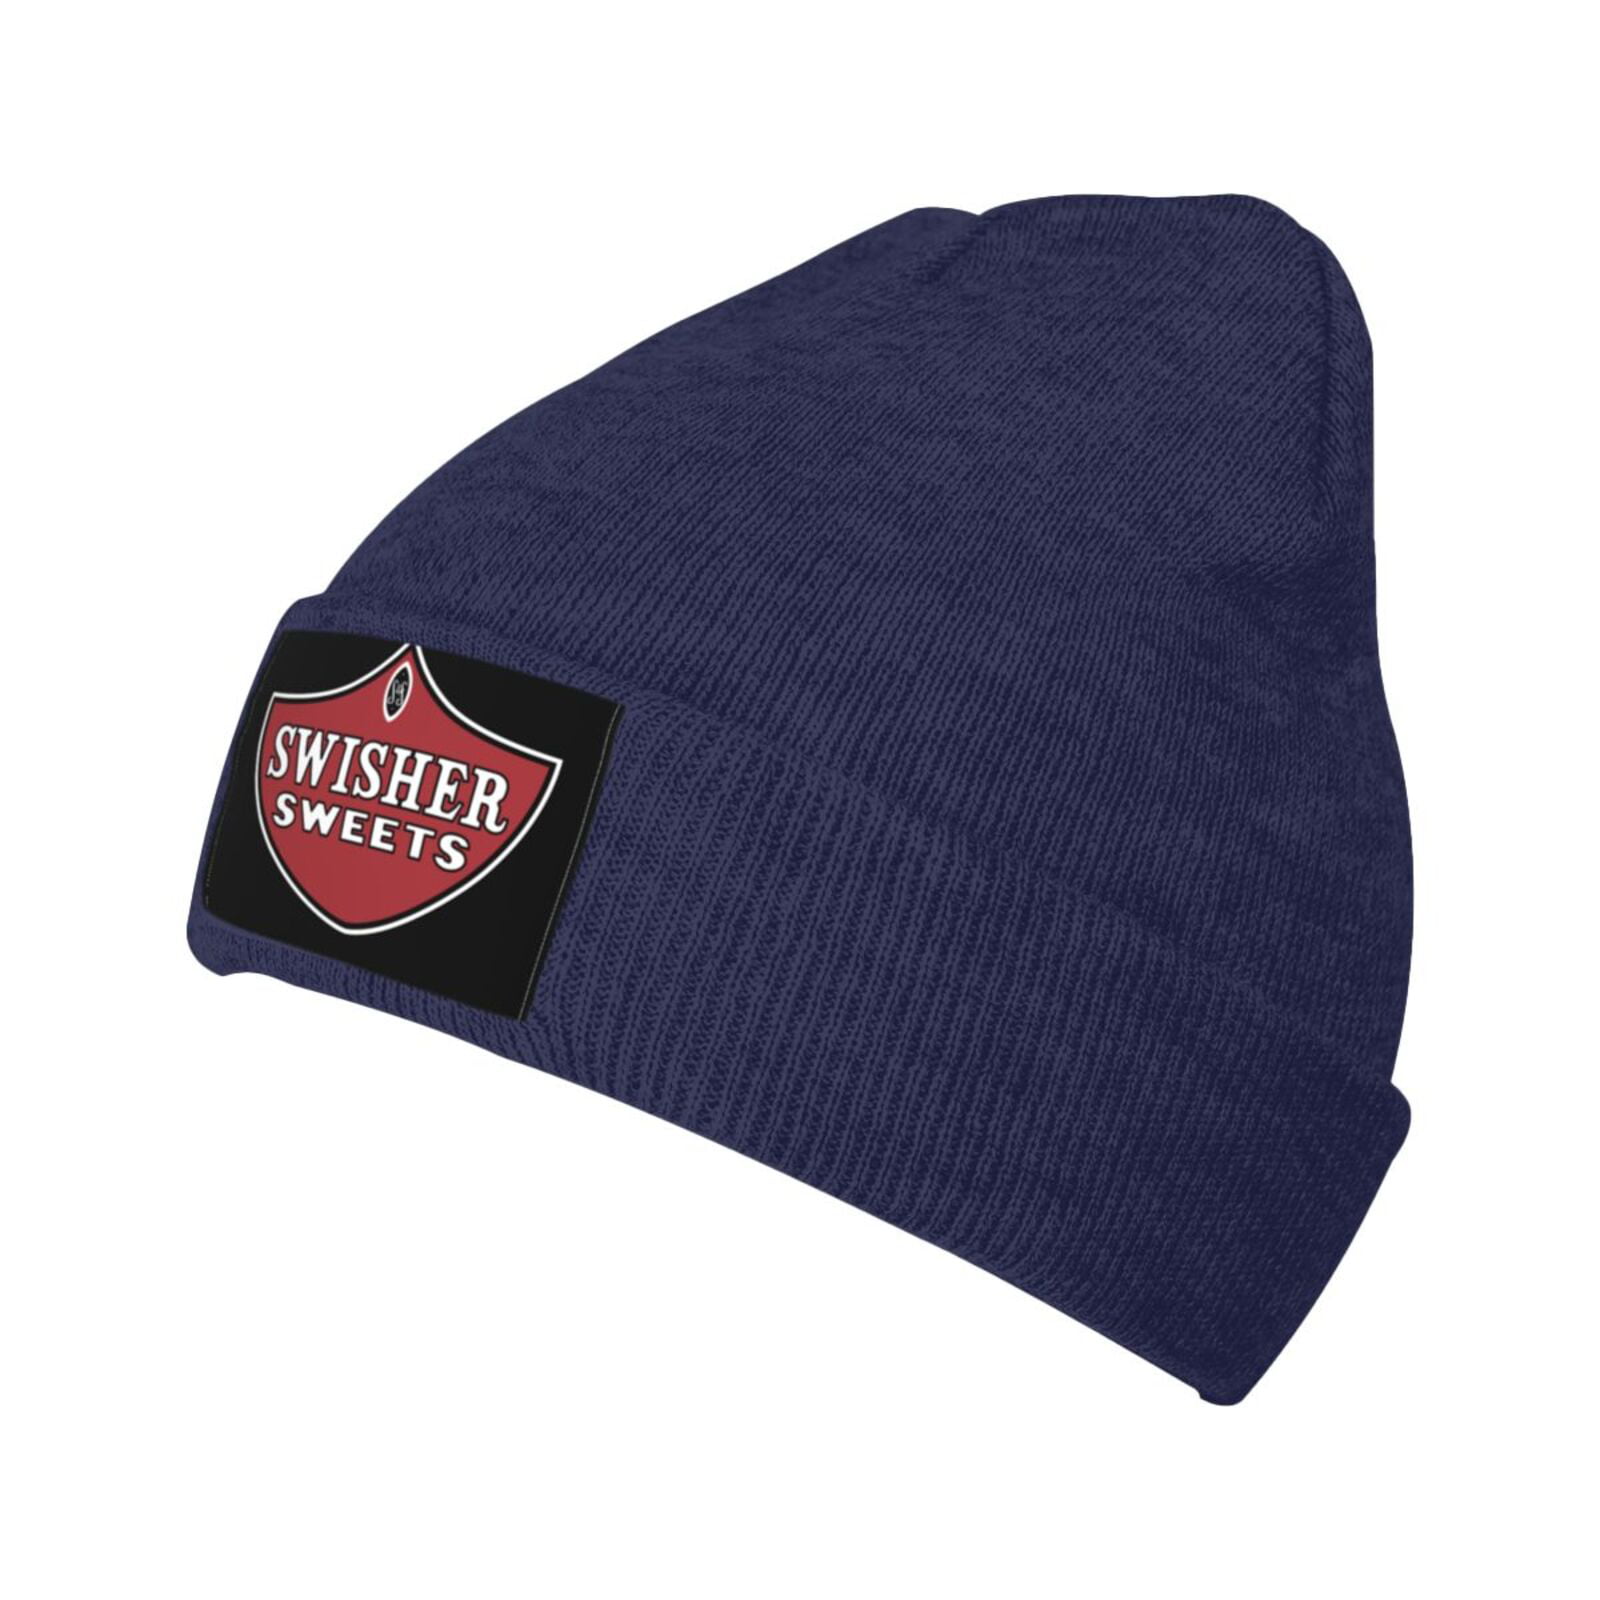 Swisher Sweets \r\nVikings Beanie Hat Cap Winter Softknit Stocking Cap  Slouchy Headwear For Adult Outdoor Navy Blue